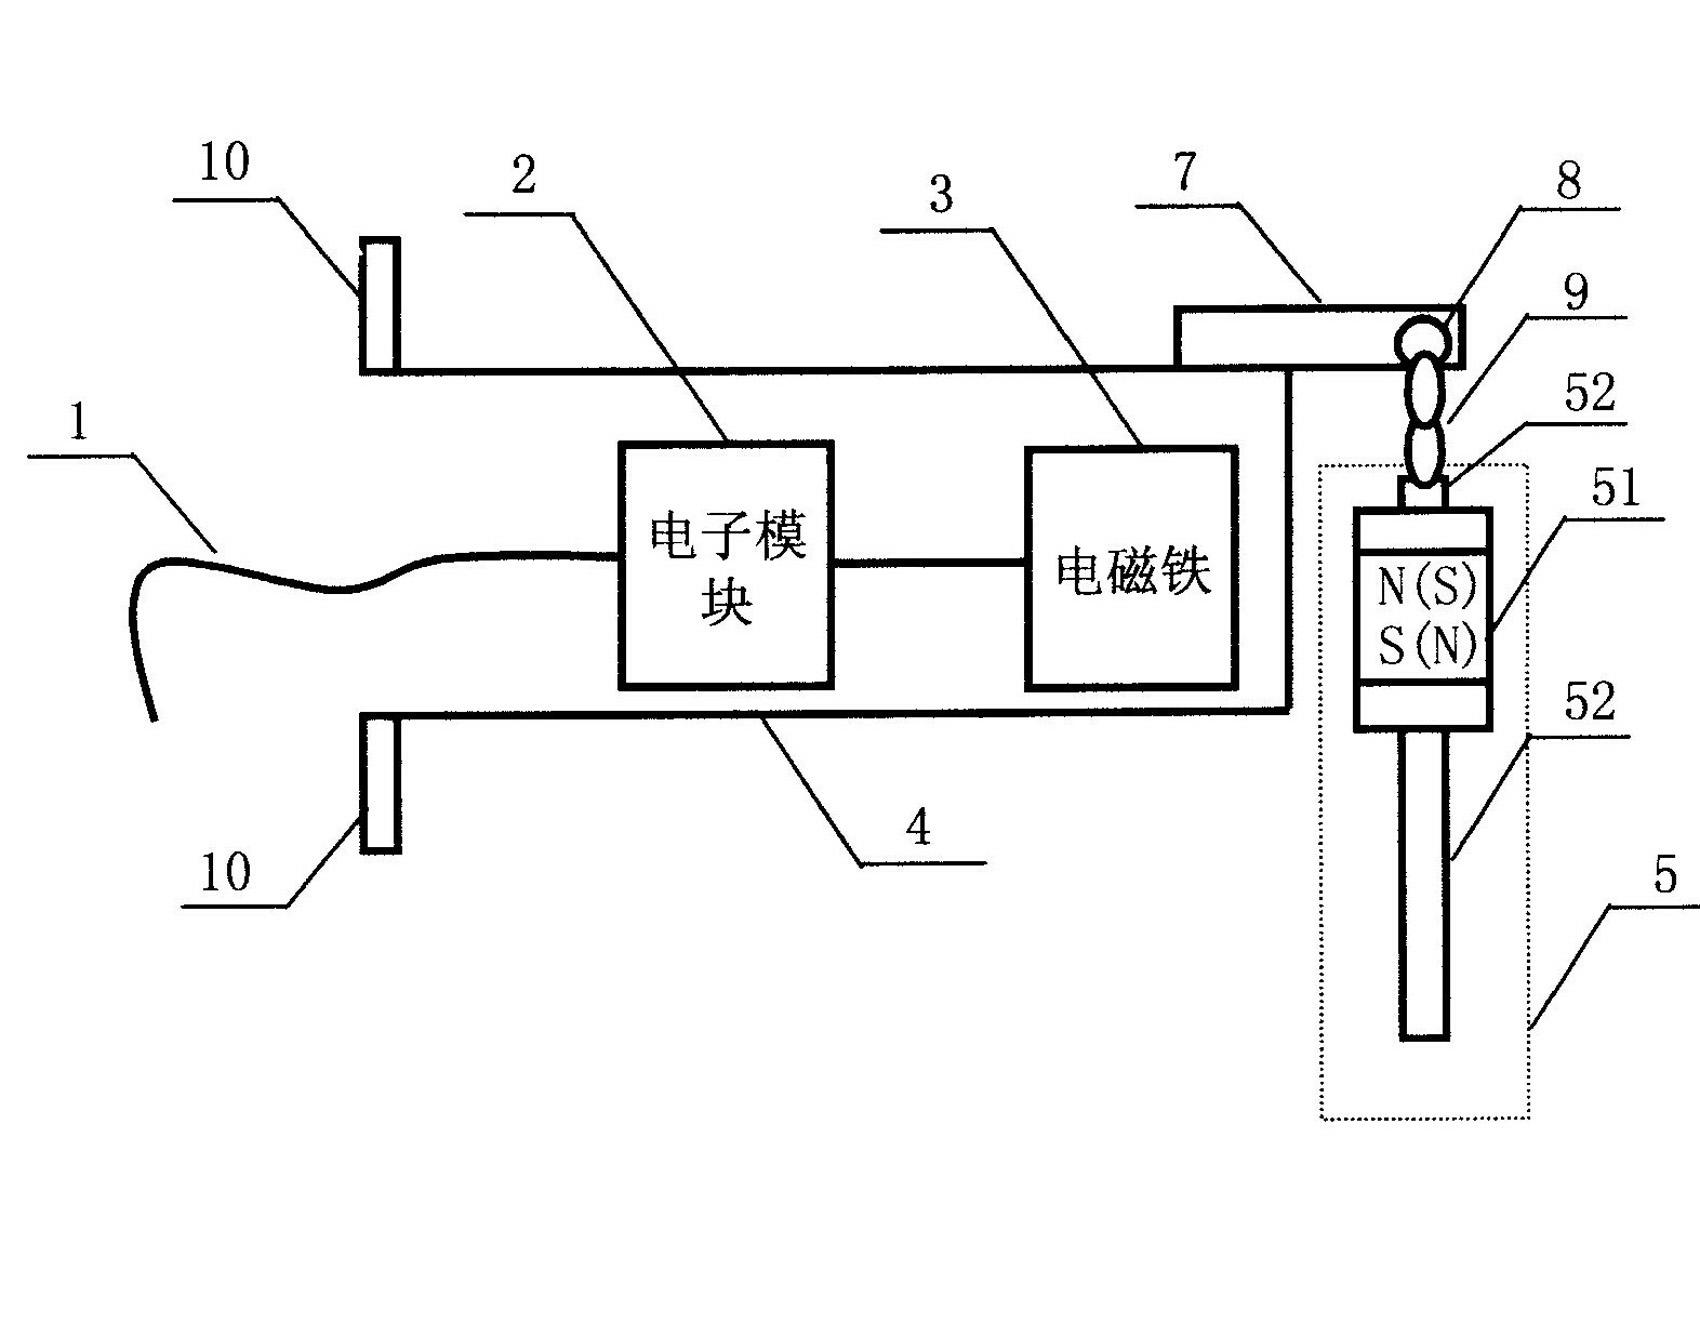 Electromagnetic pushing-beating-type object-detecting device